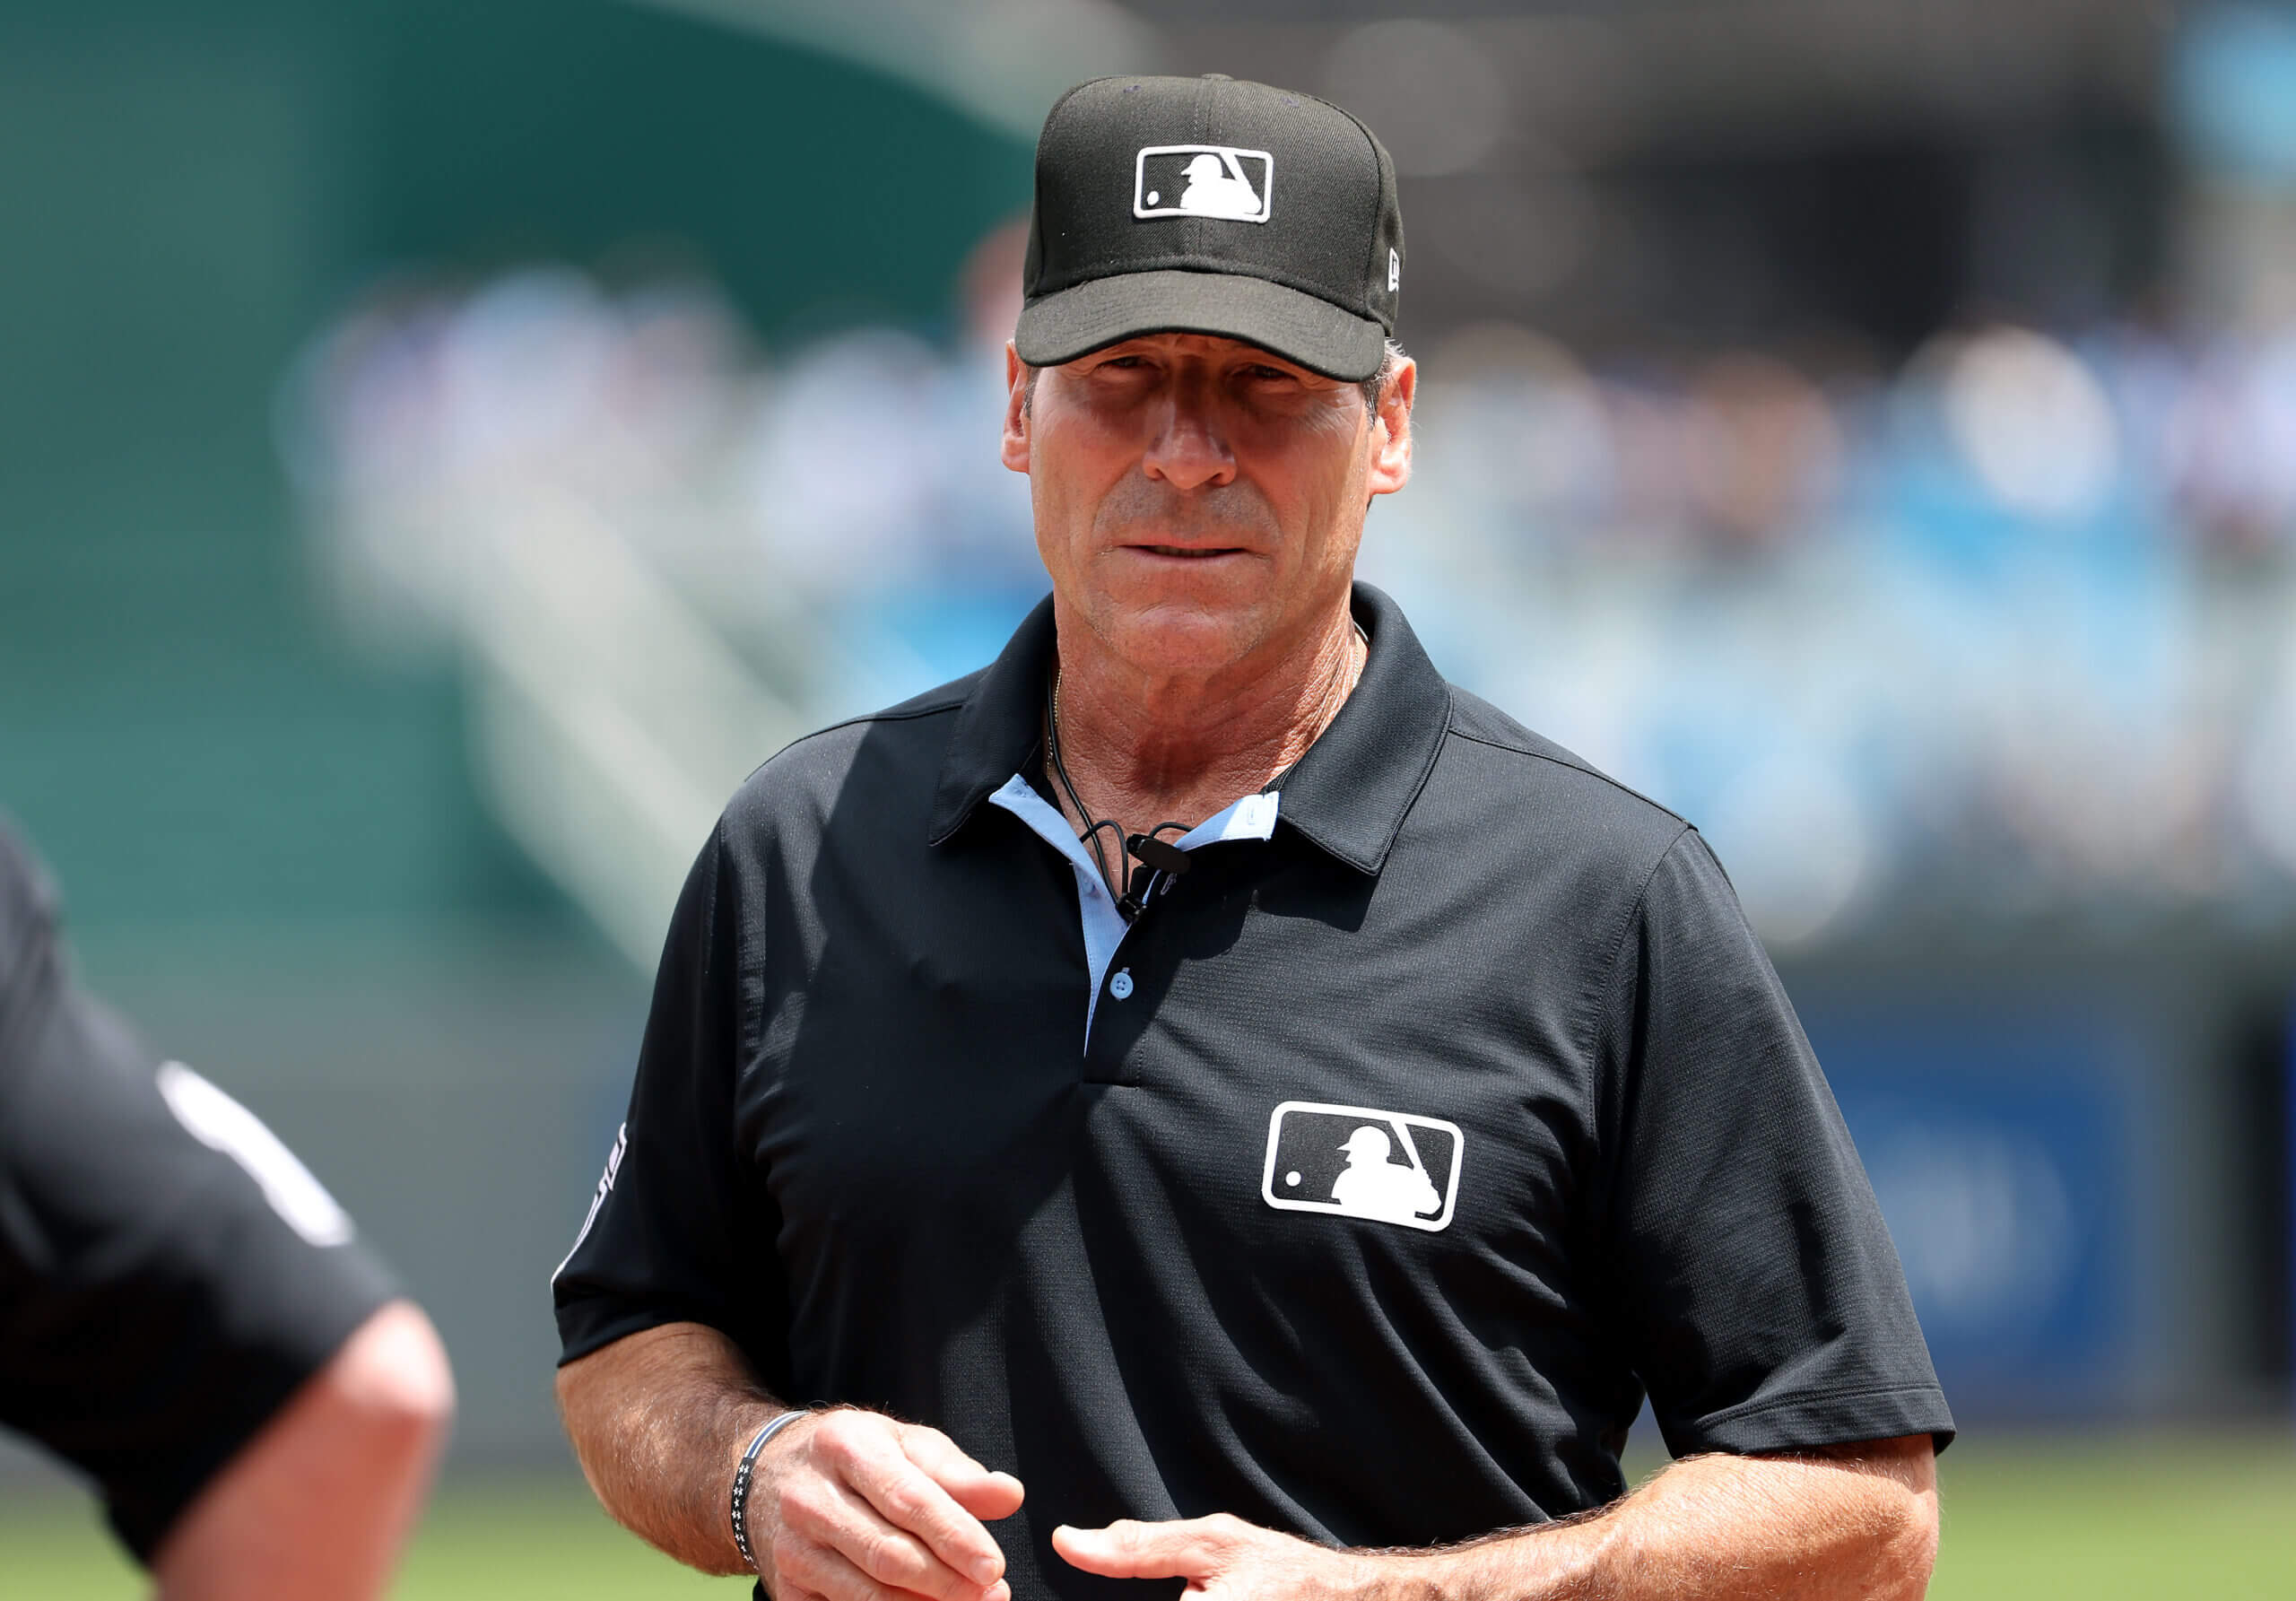 ‘I guess he must have had enough’: Baseball bids adieu to its most notorious umpire